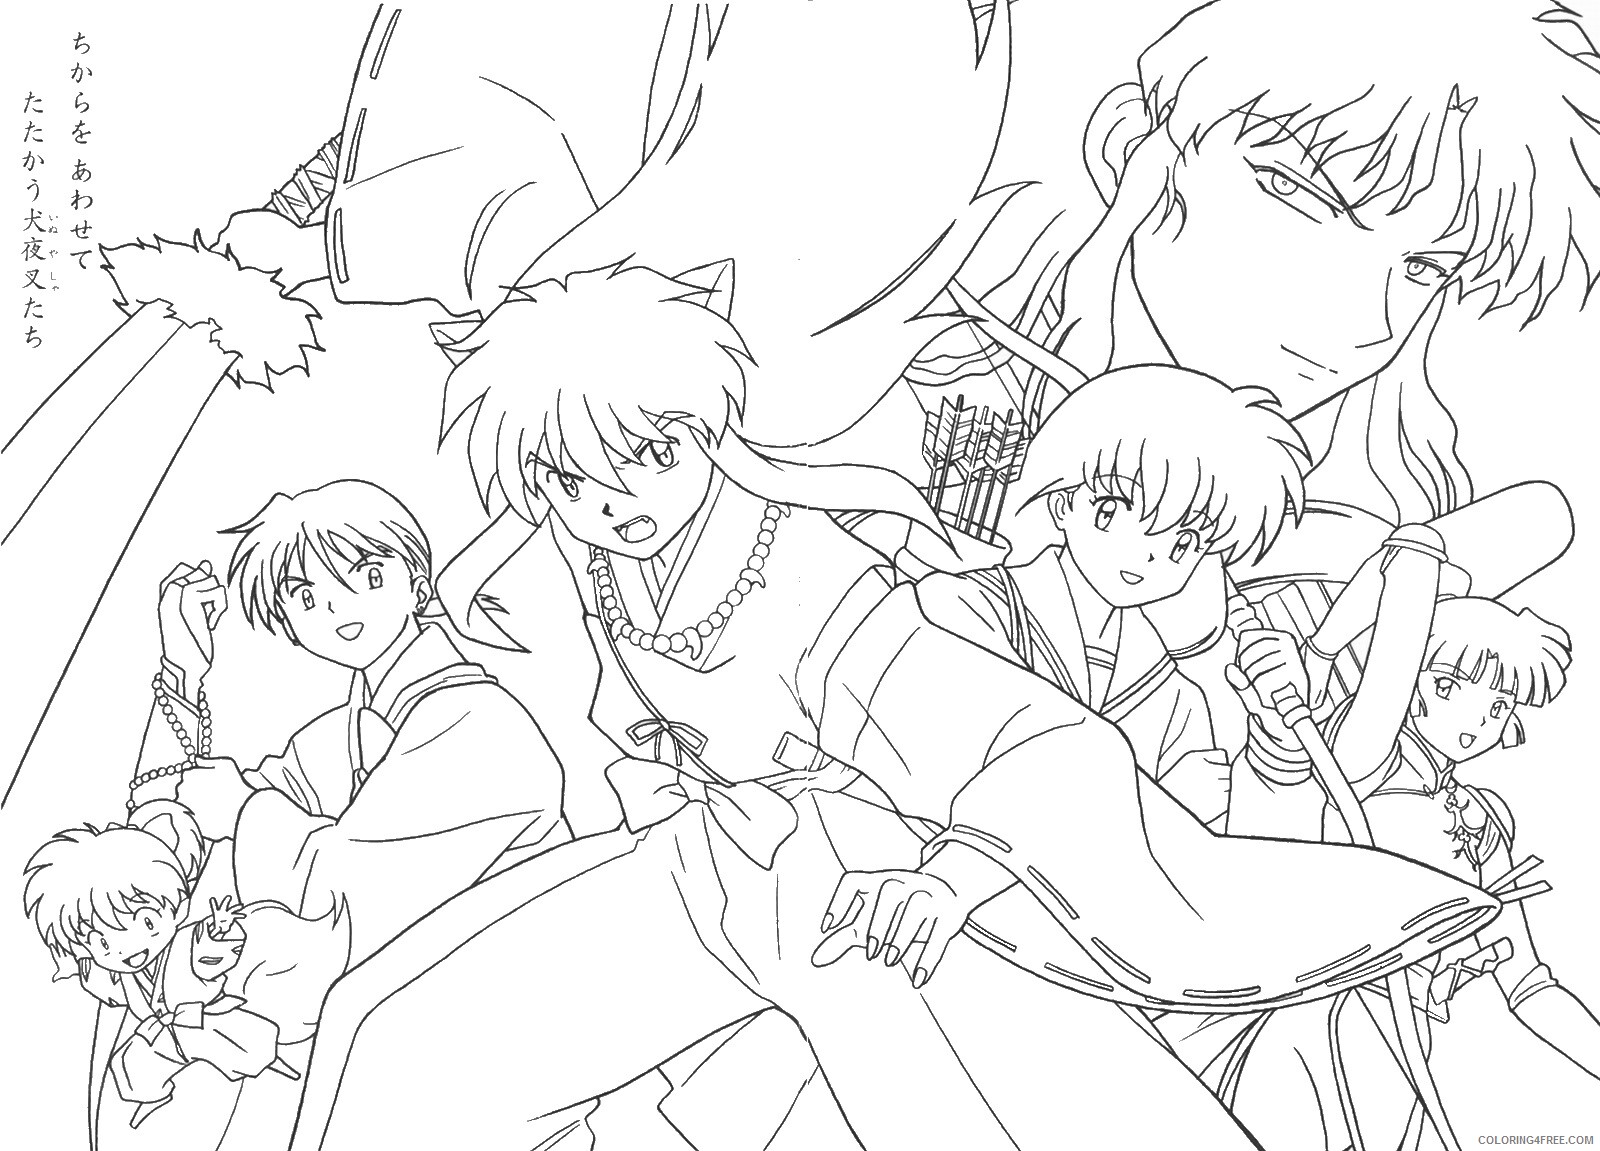 Inuyasha Printable Coloring Pages Anime inuyasha_cl_10 2021 0816 Coloring4free